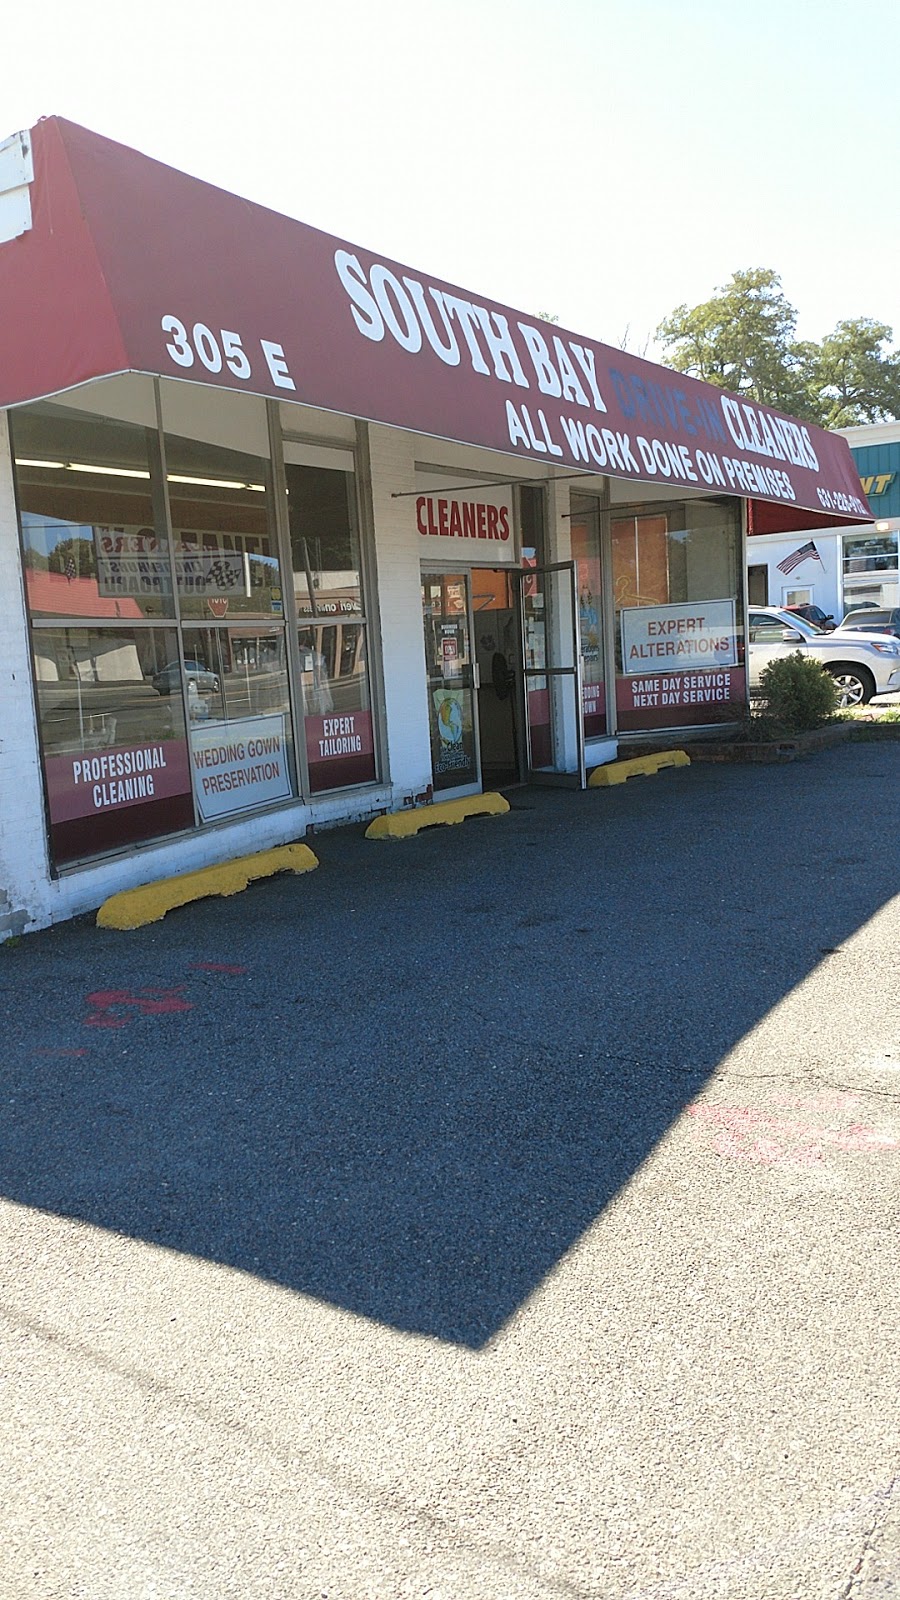 South Bay Drive In Cleaners | 305 E Montauk Hwy, Lindenhurst, NY 11757 | Phone: (631) 226-9127